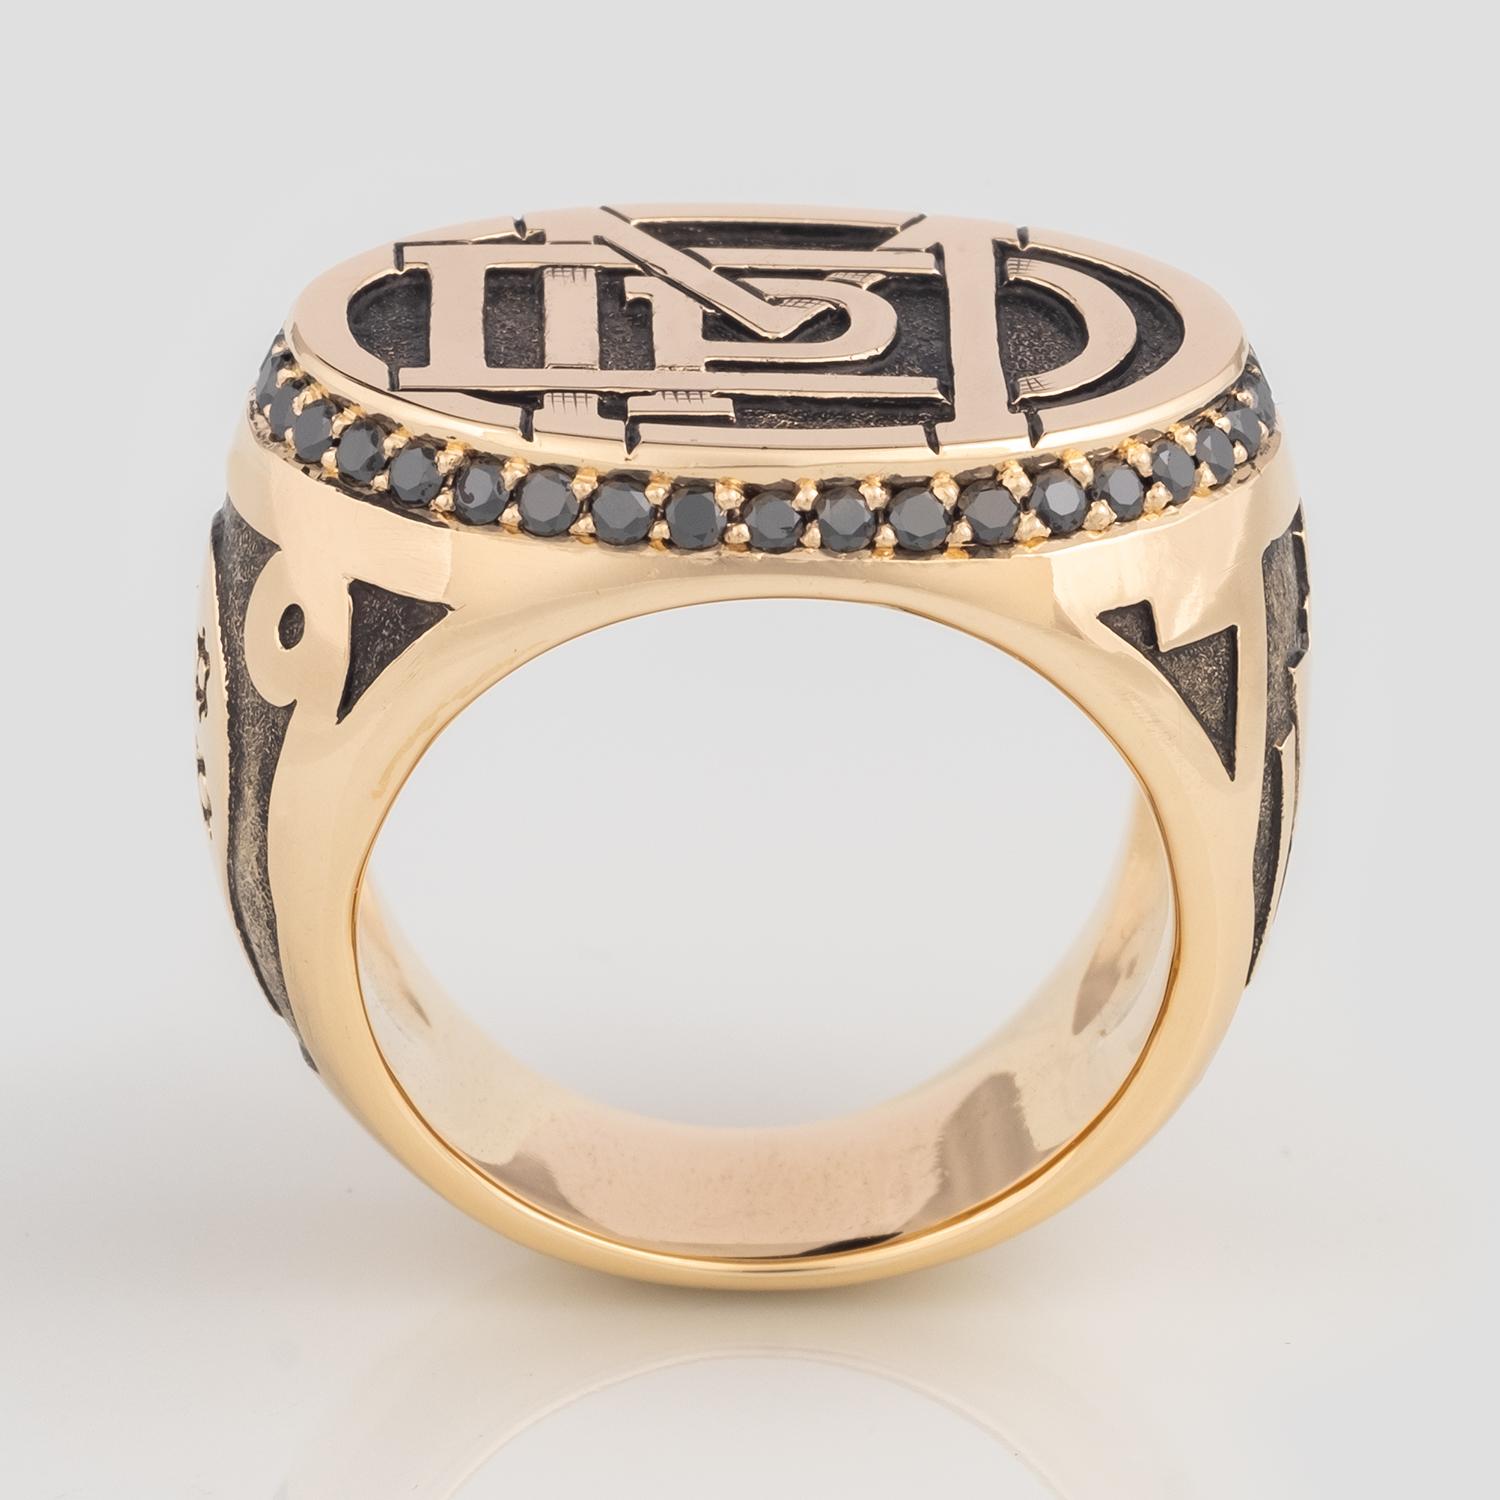 For Sale:  Commission a Personalized Monogram Signet Ring 3